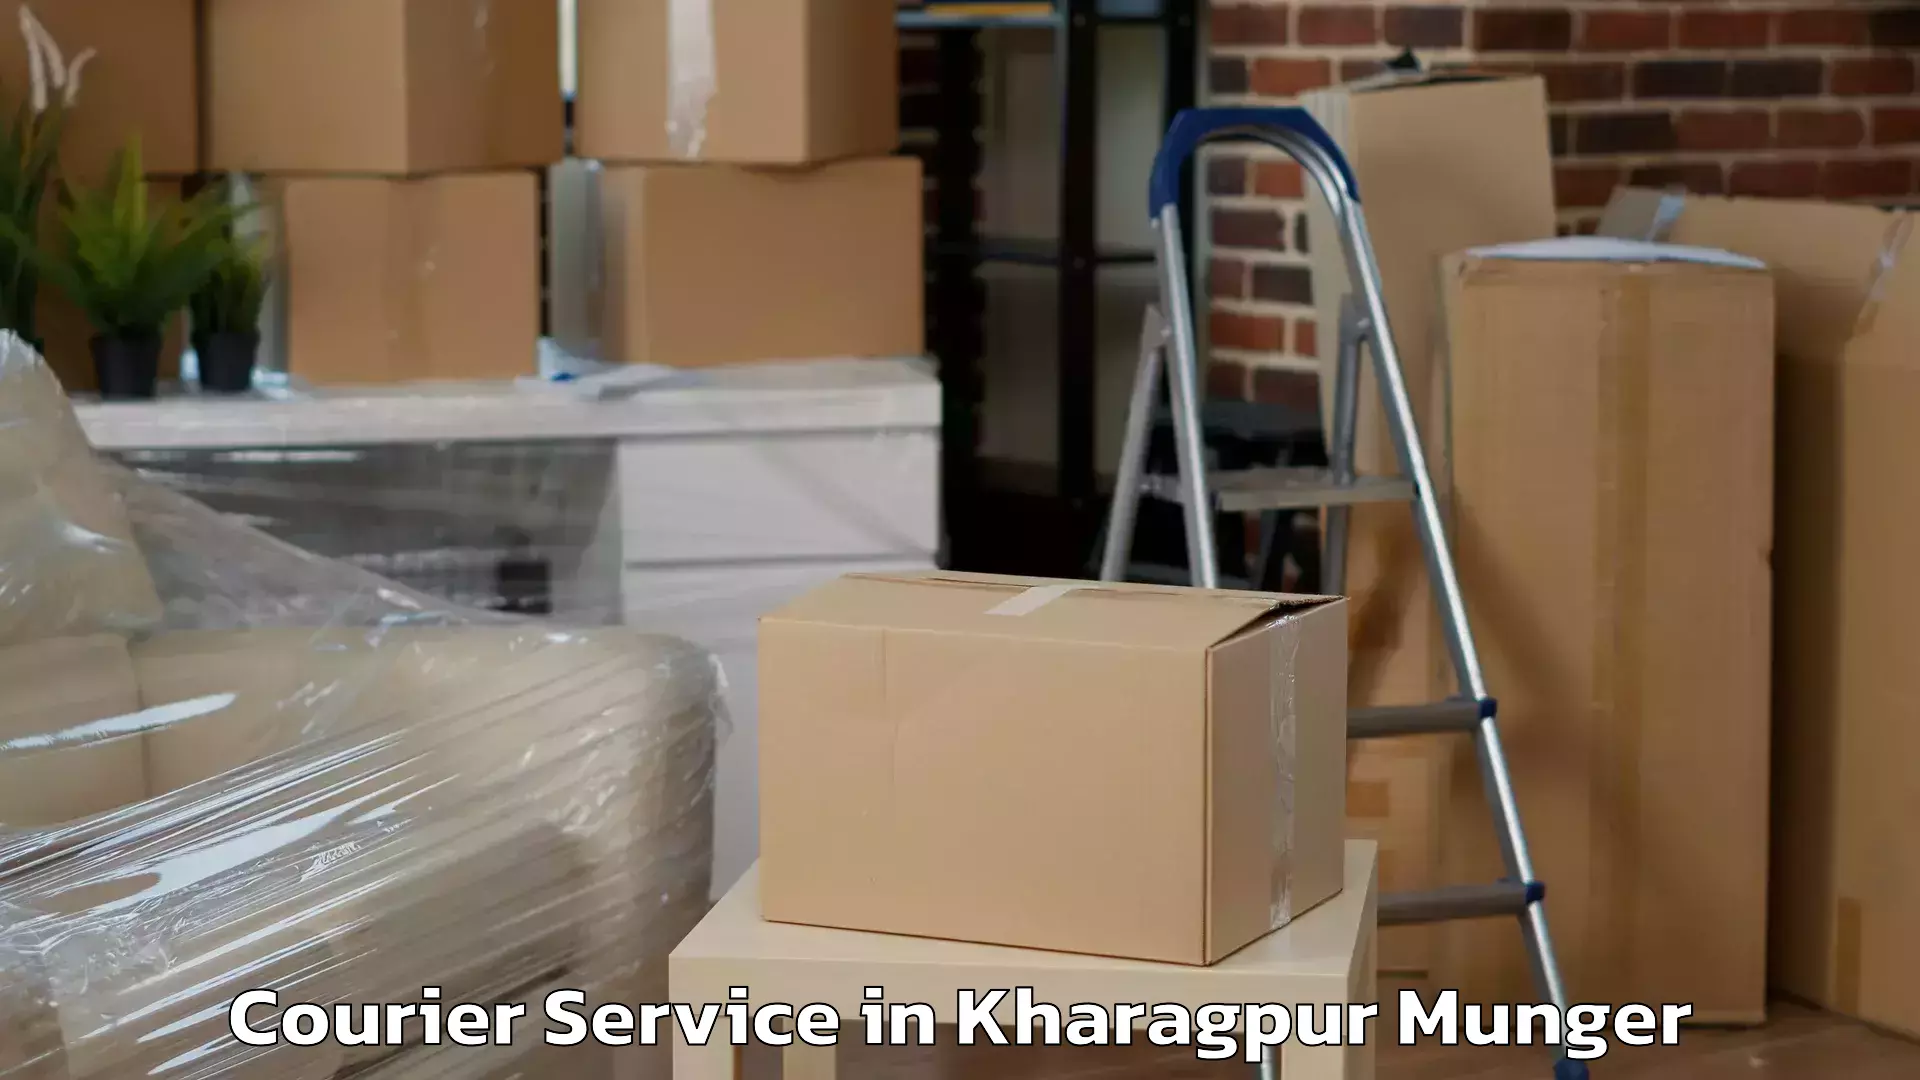 Customer-friendly courier services in Kharagpur Munger